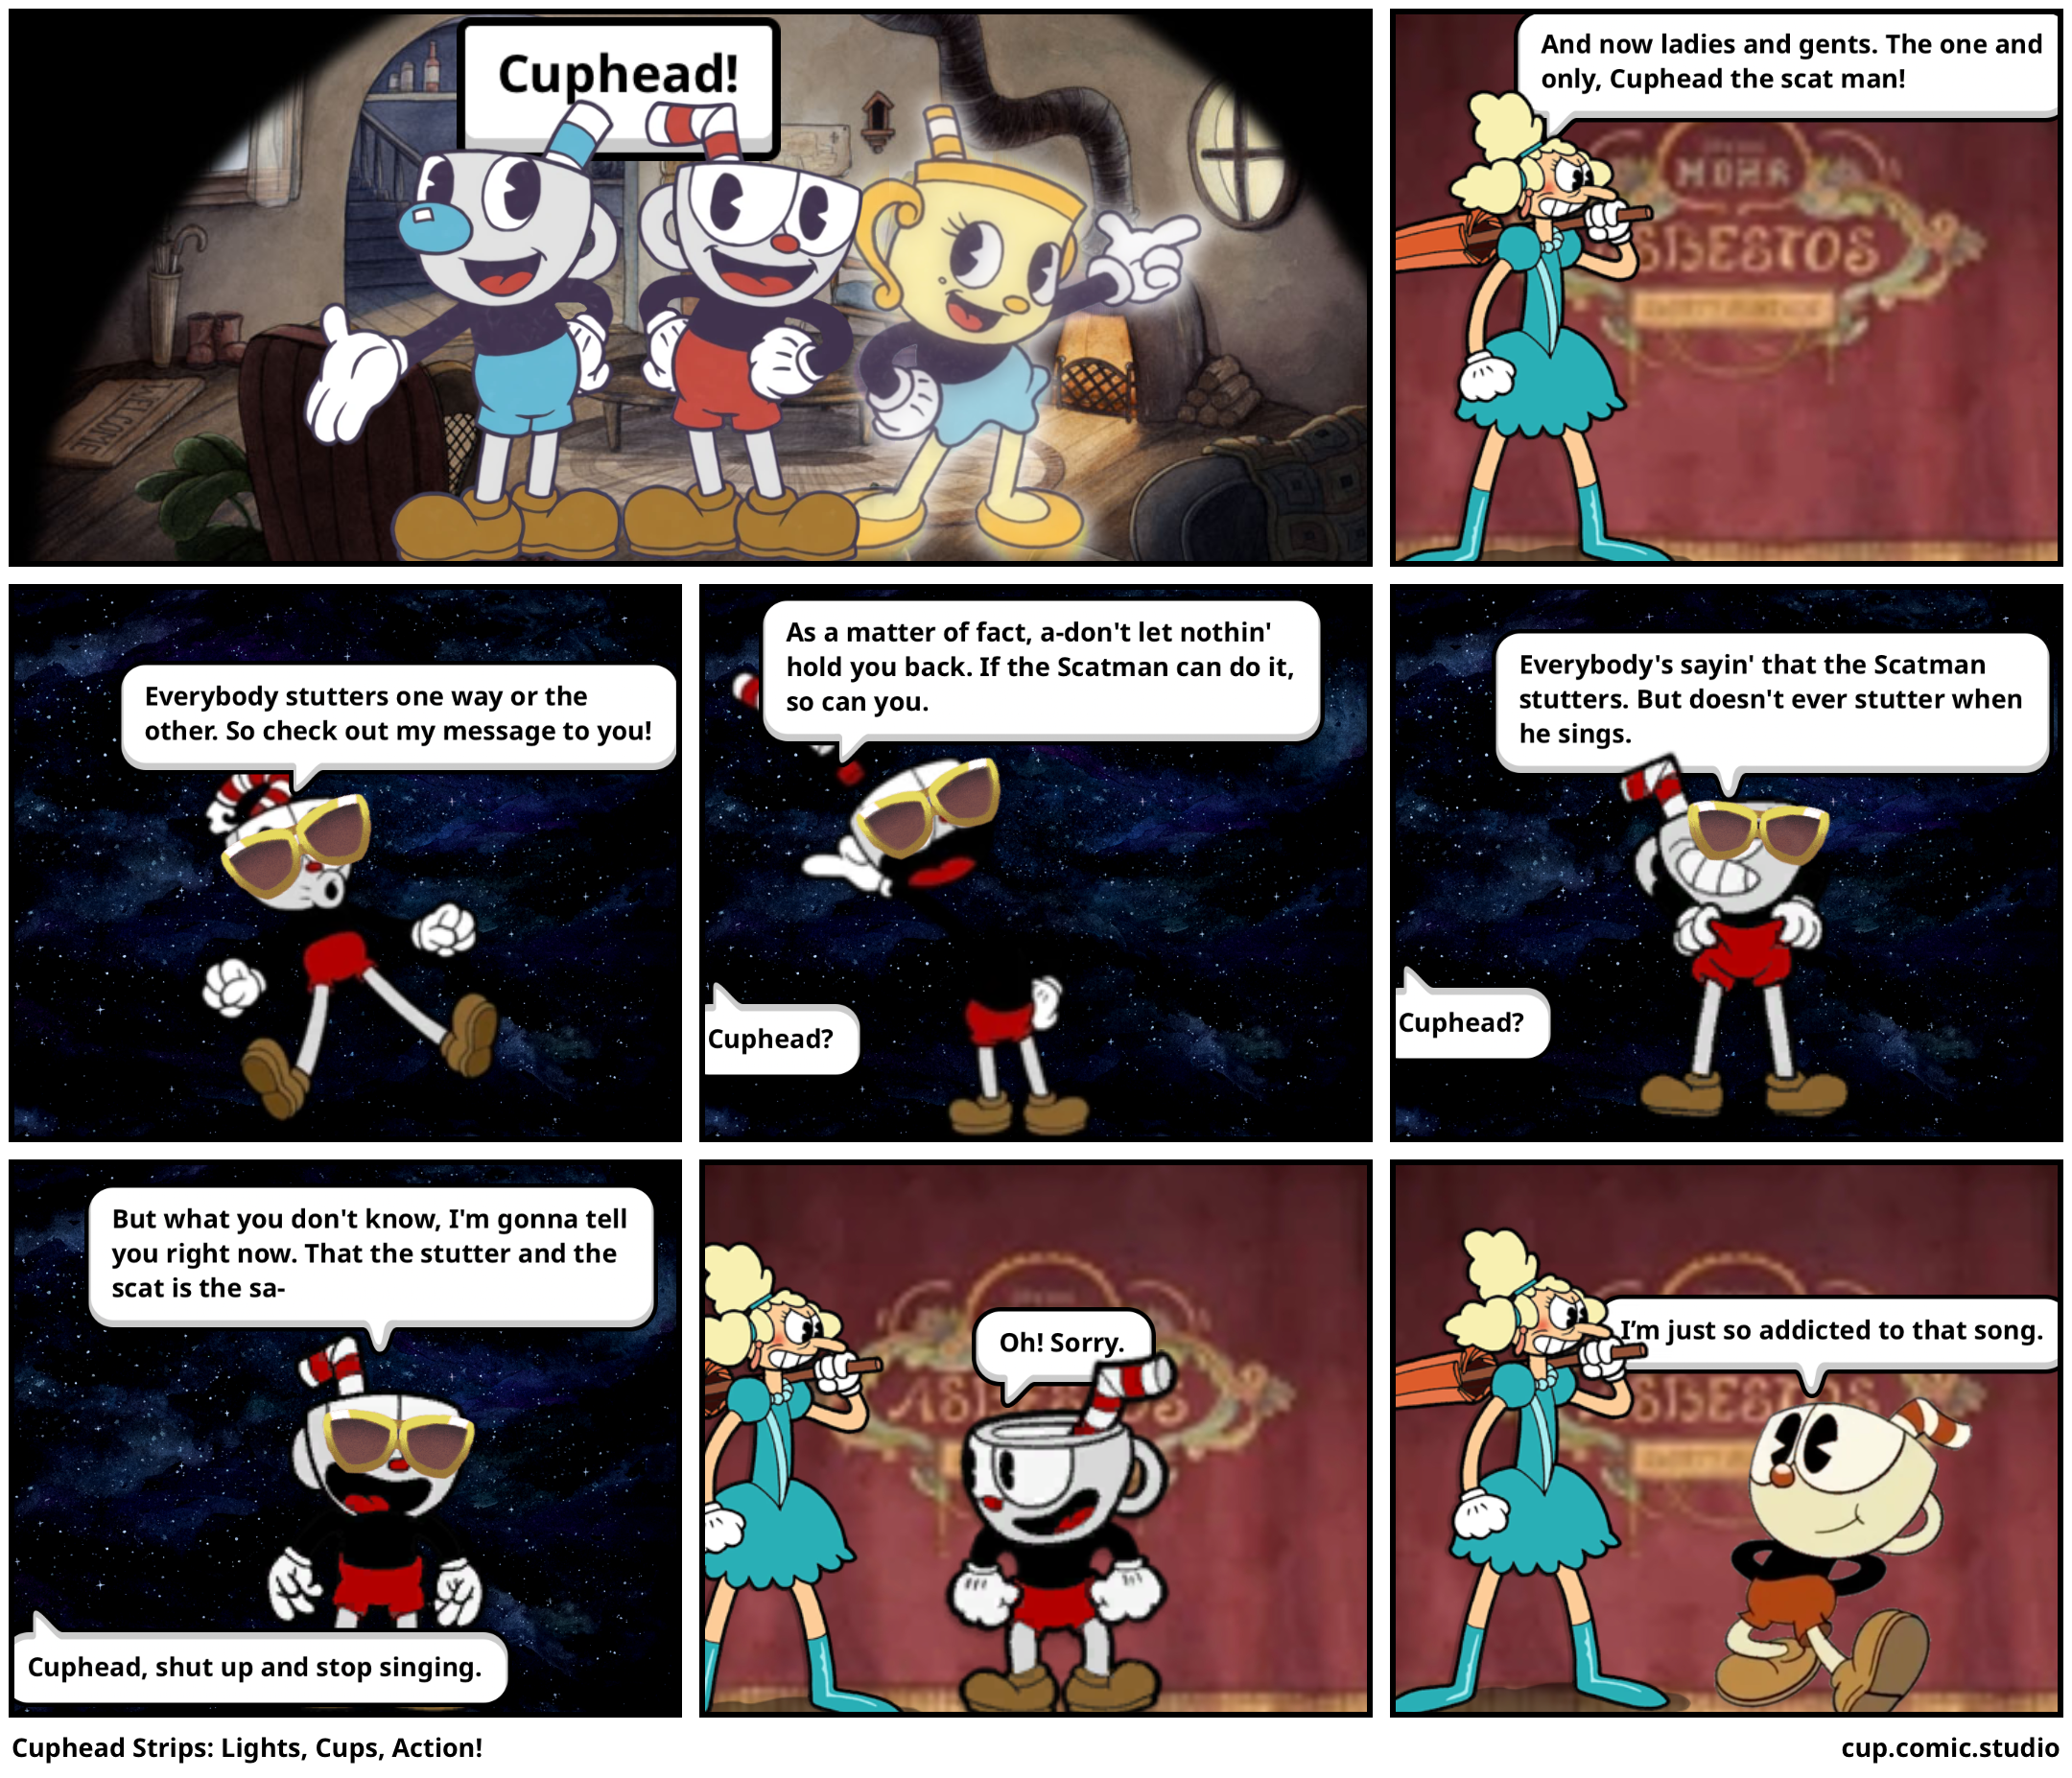 Cuphead Strips: Lights, Cups, Action!